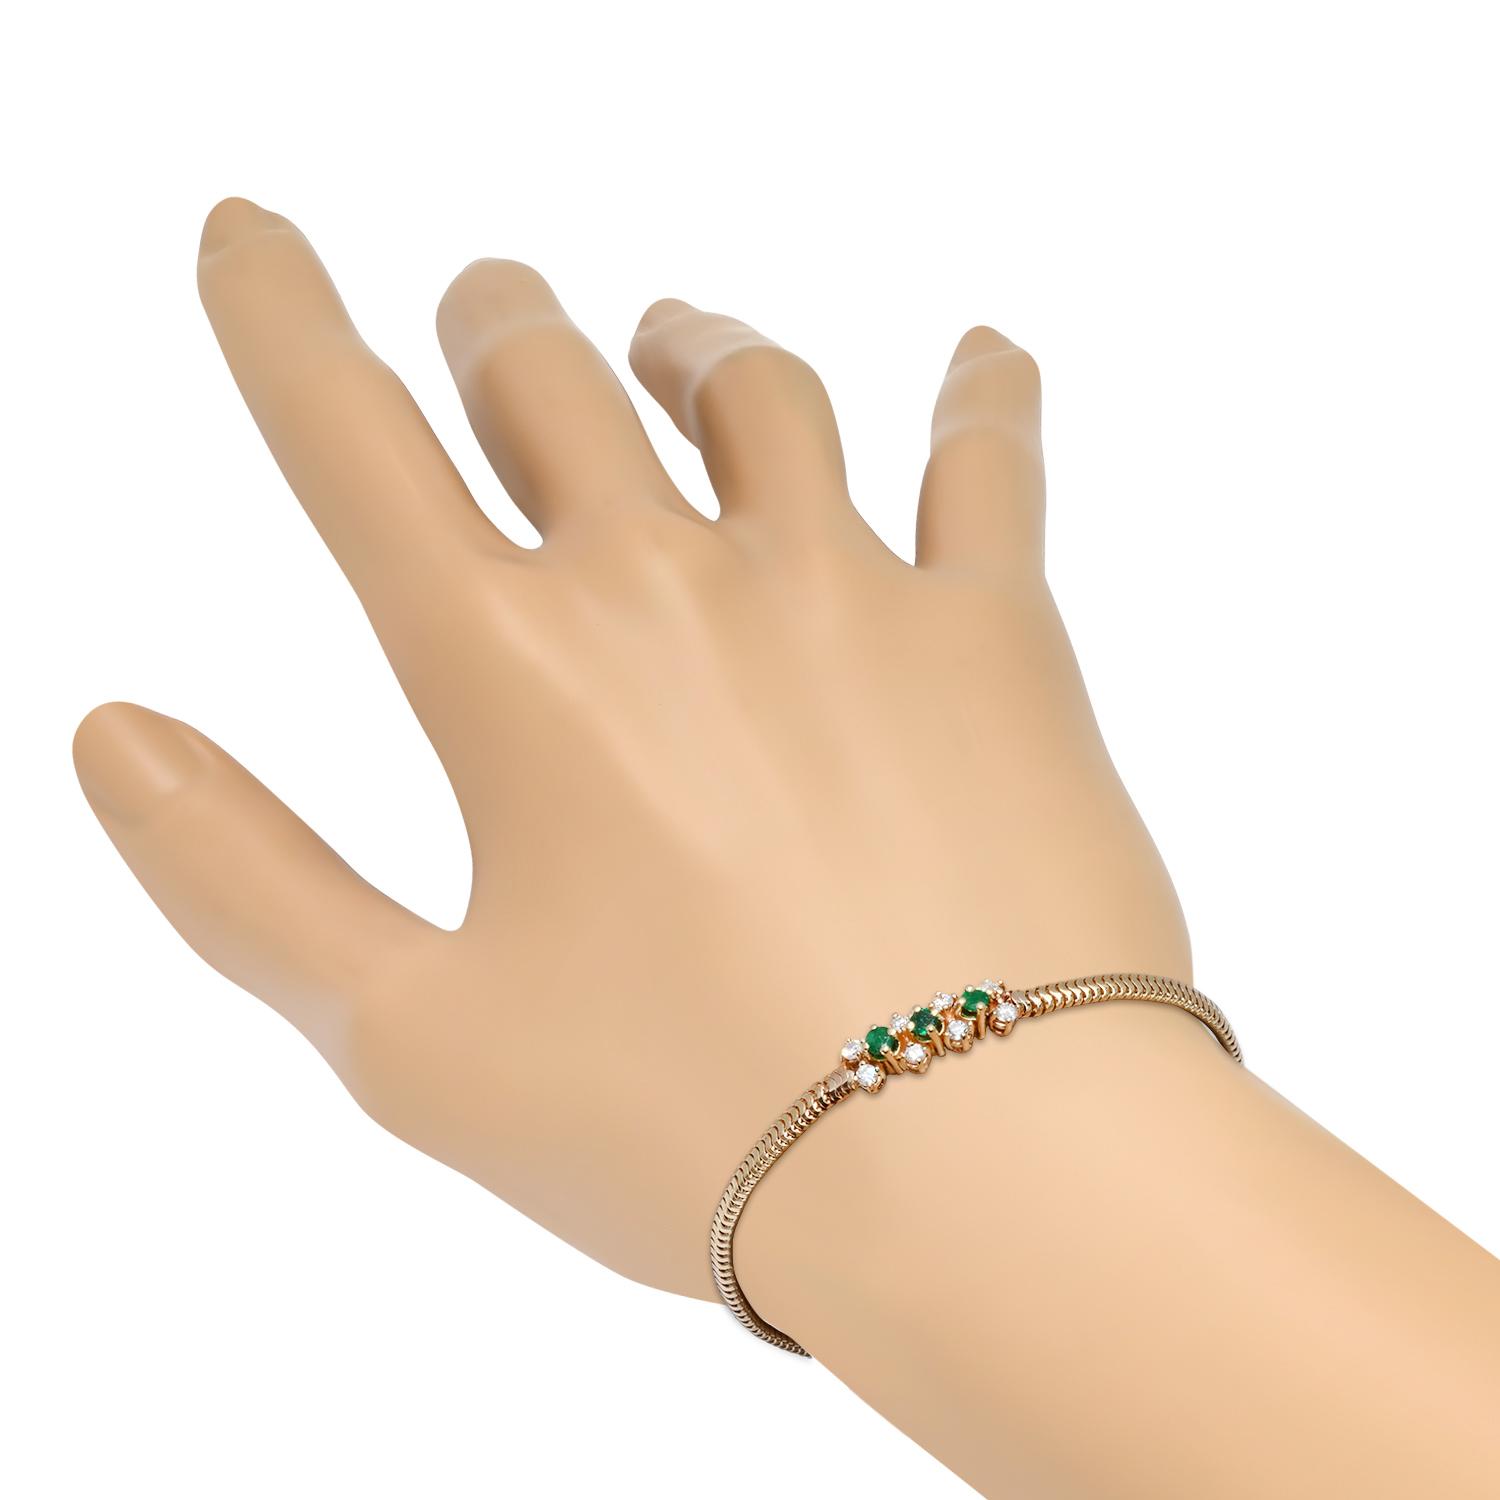 14K Yellow Gold Setting with 0.25ct Emerald and 0.20ct Diamond Estate" Bracelet"